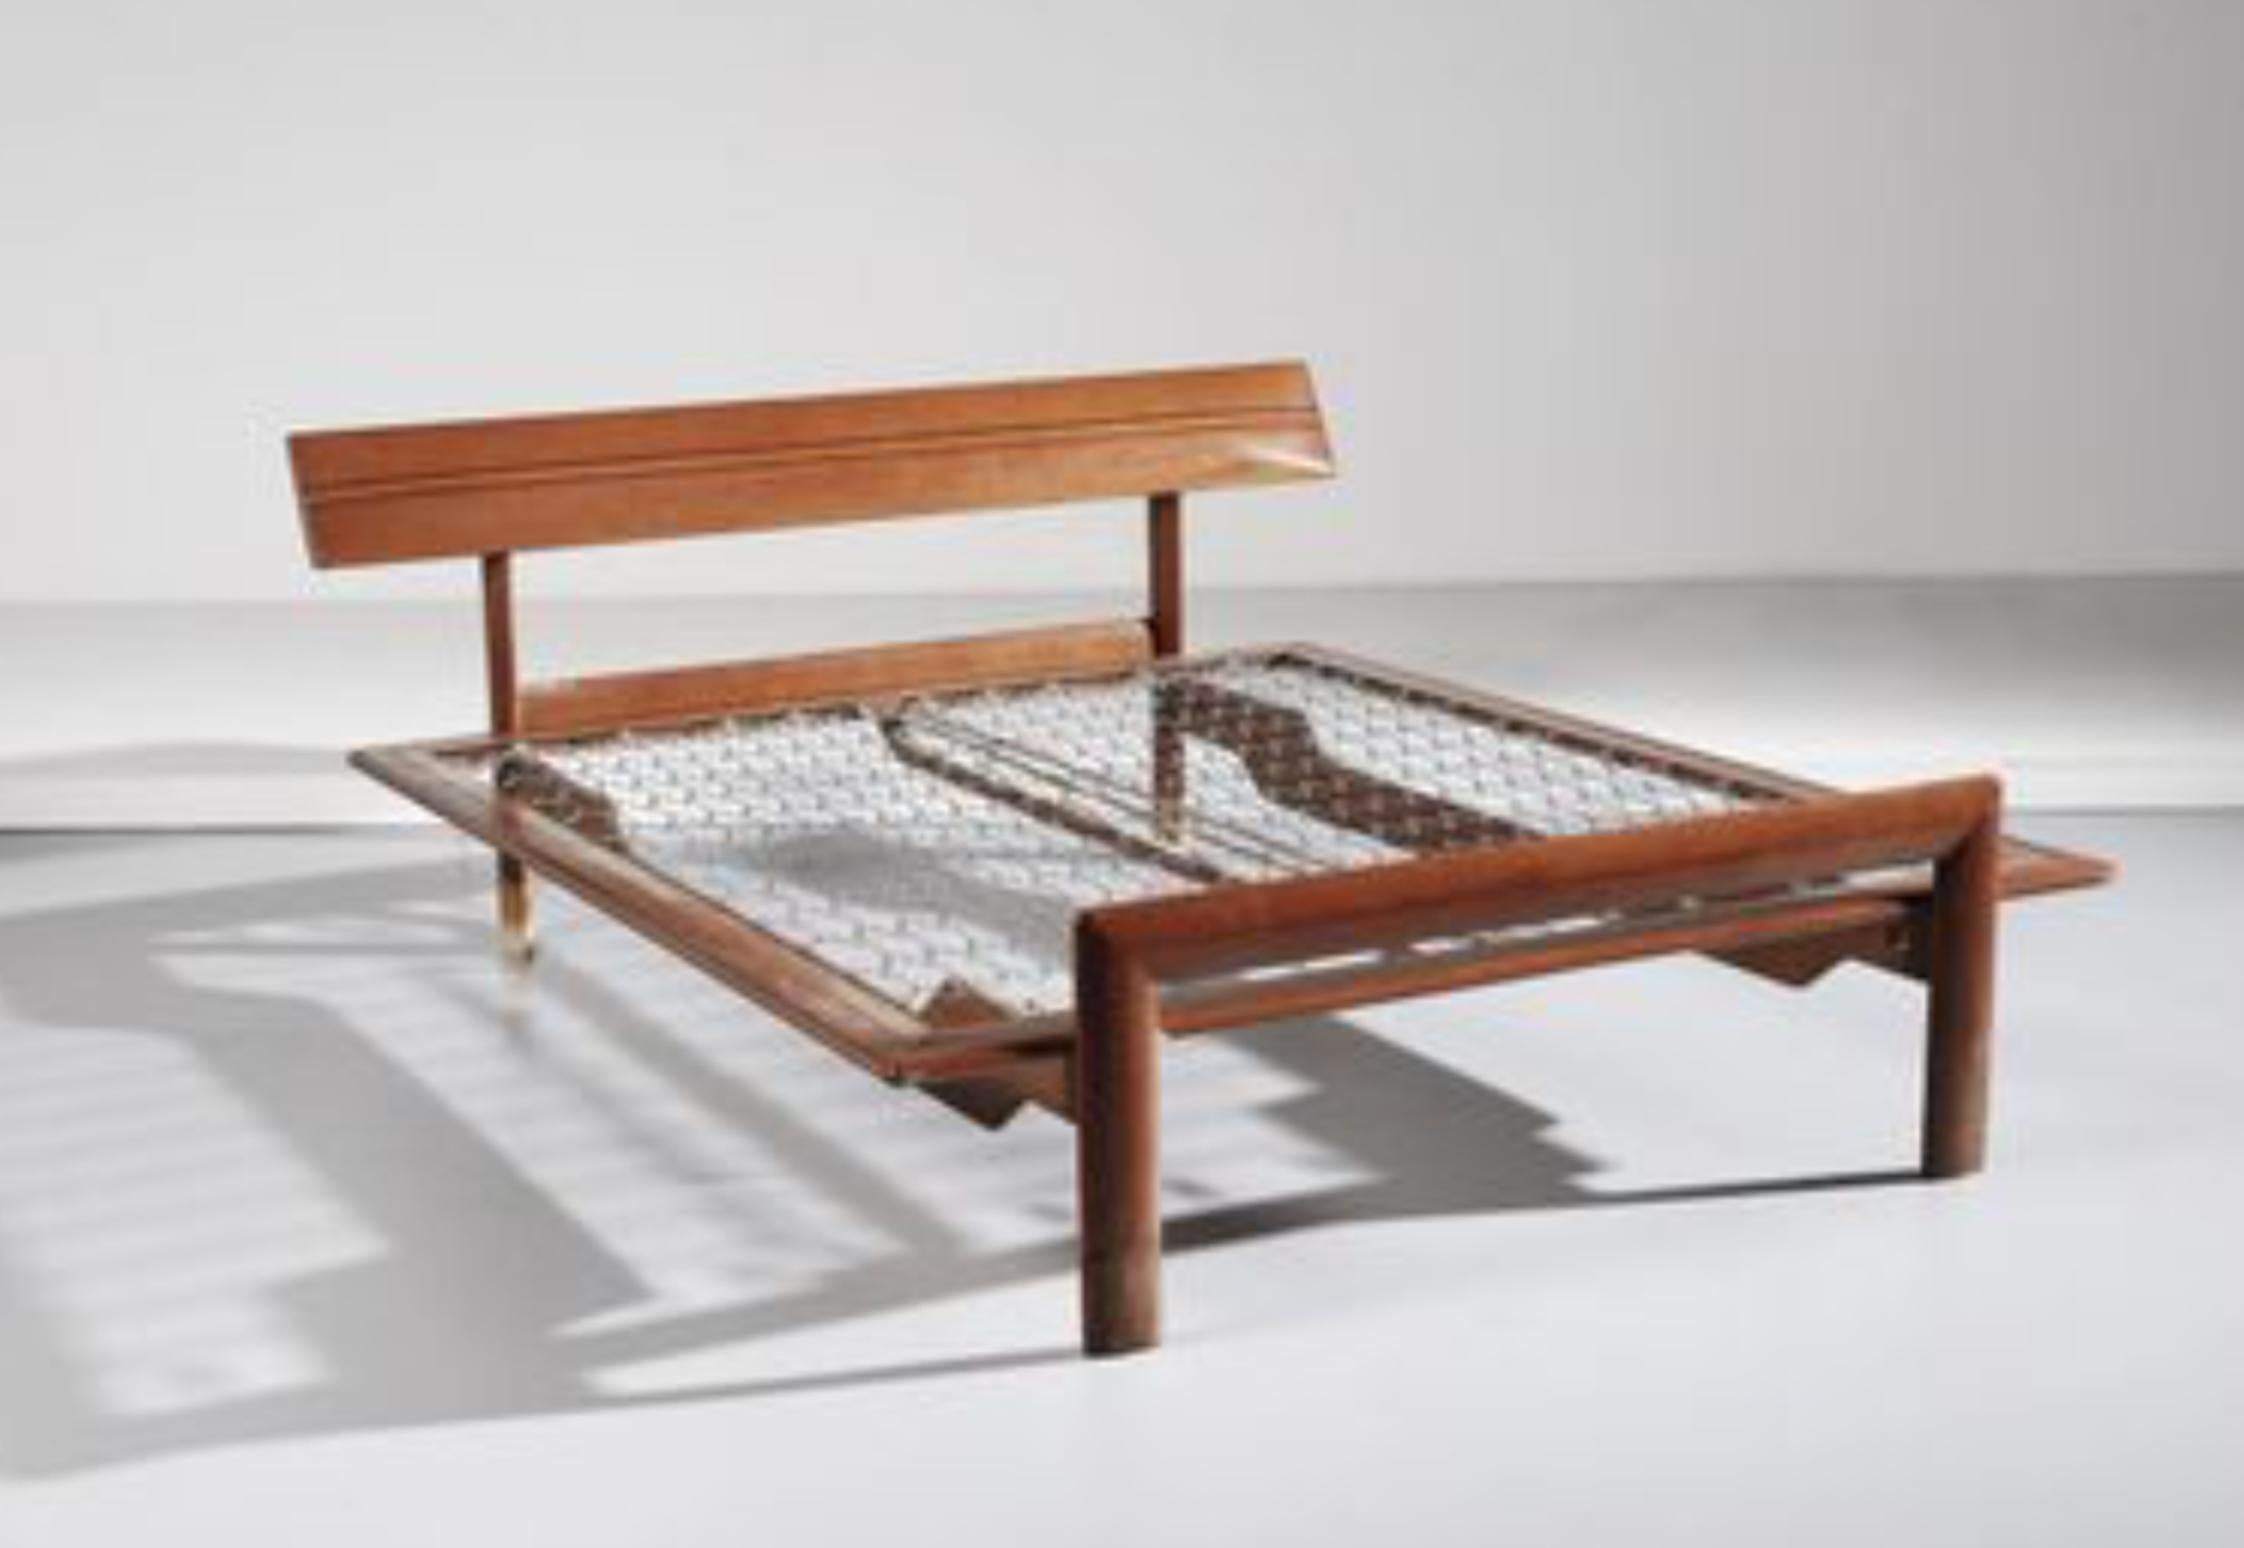 Hand-Carved Mid-Century Modern Wooden Italian Bed Frame Made by Eugenio Gerli for Tecno For Sale